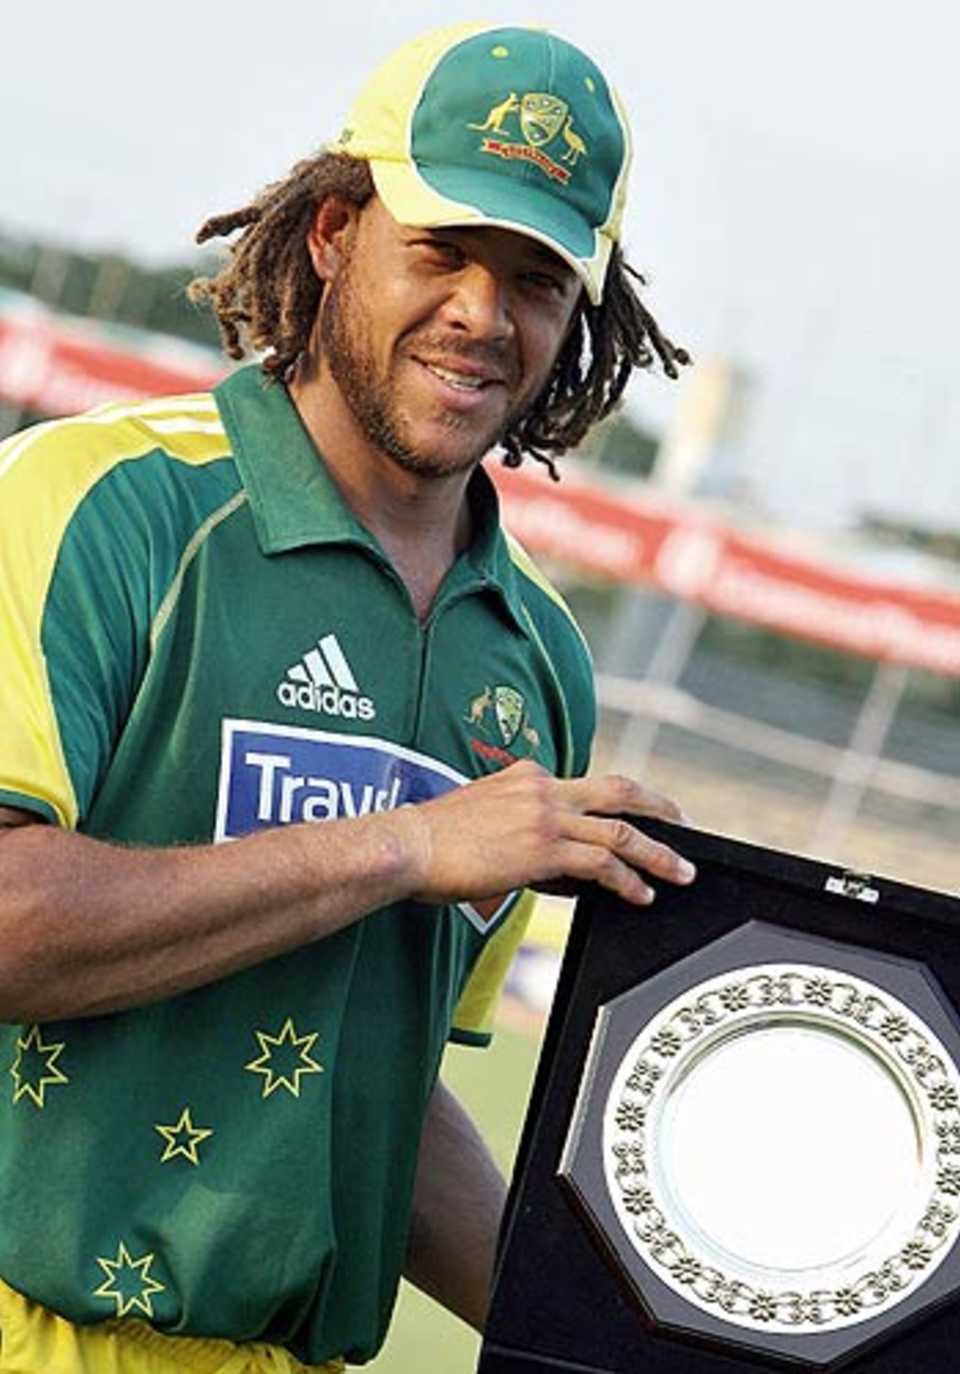 Andrew Symonds was adjudged Man of the Match for his matchwinning hundred